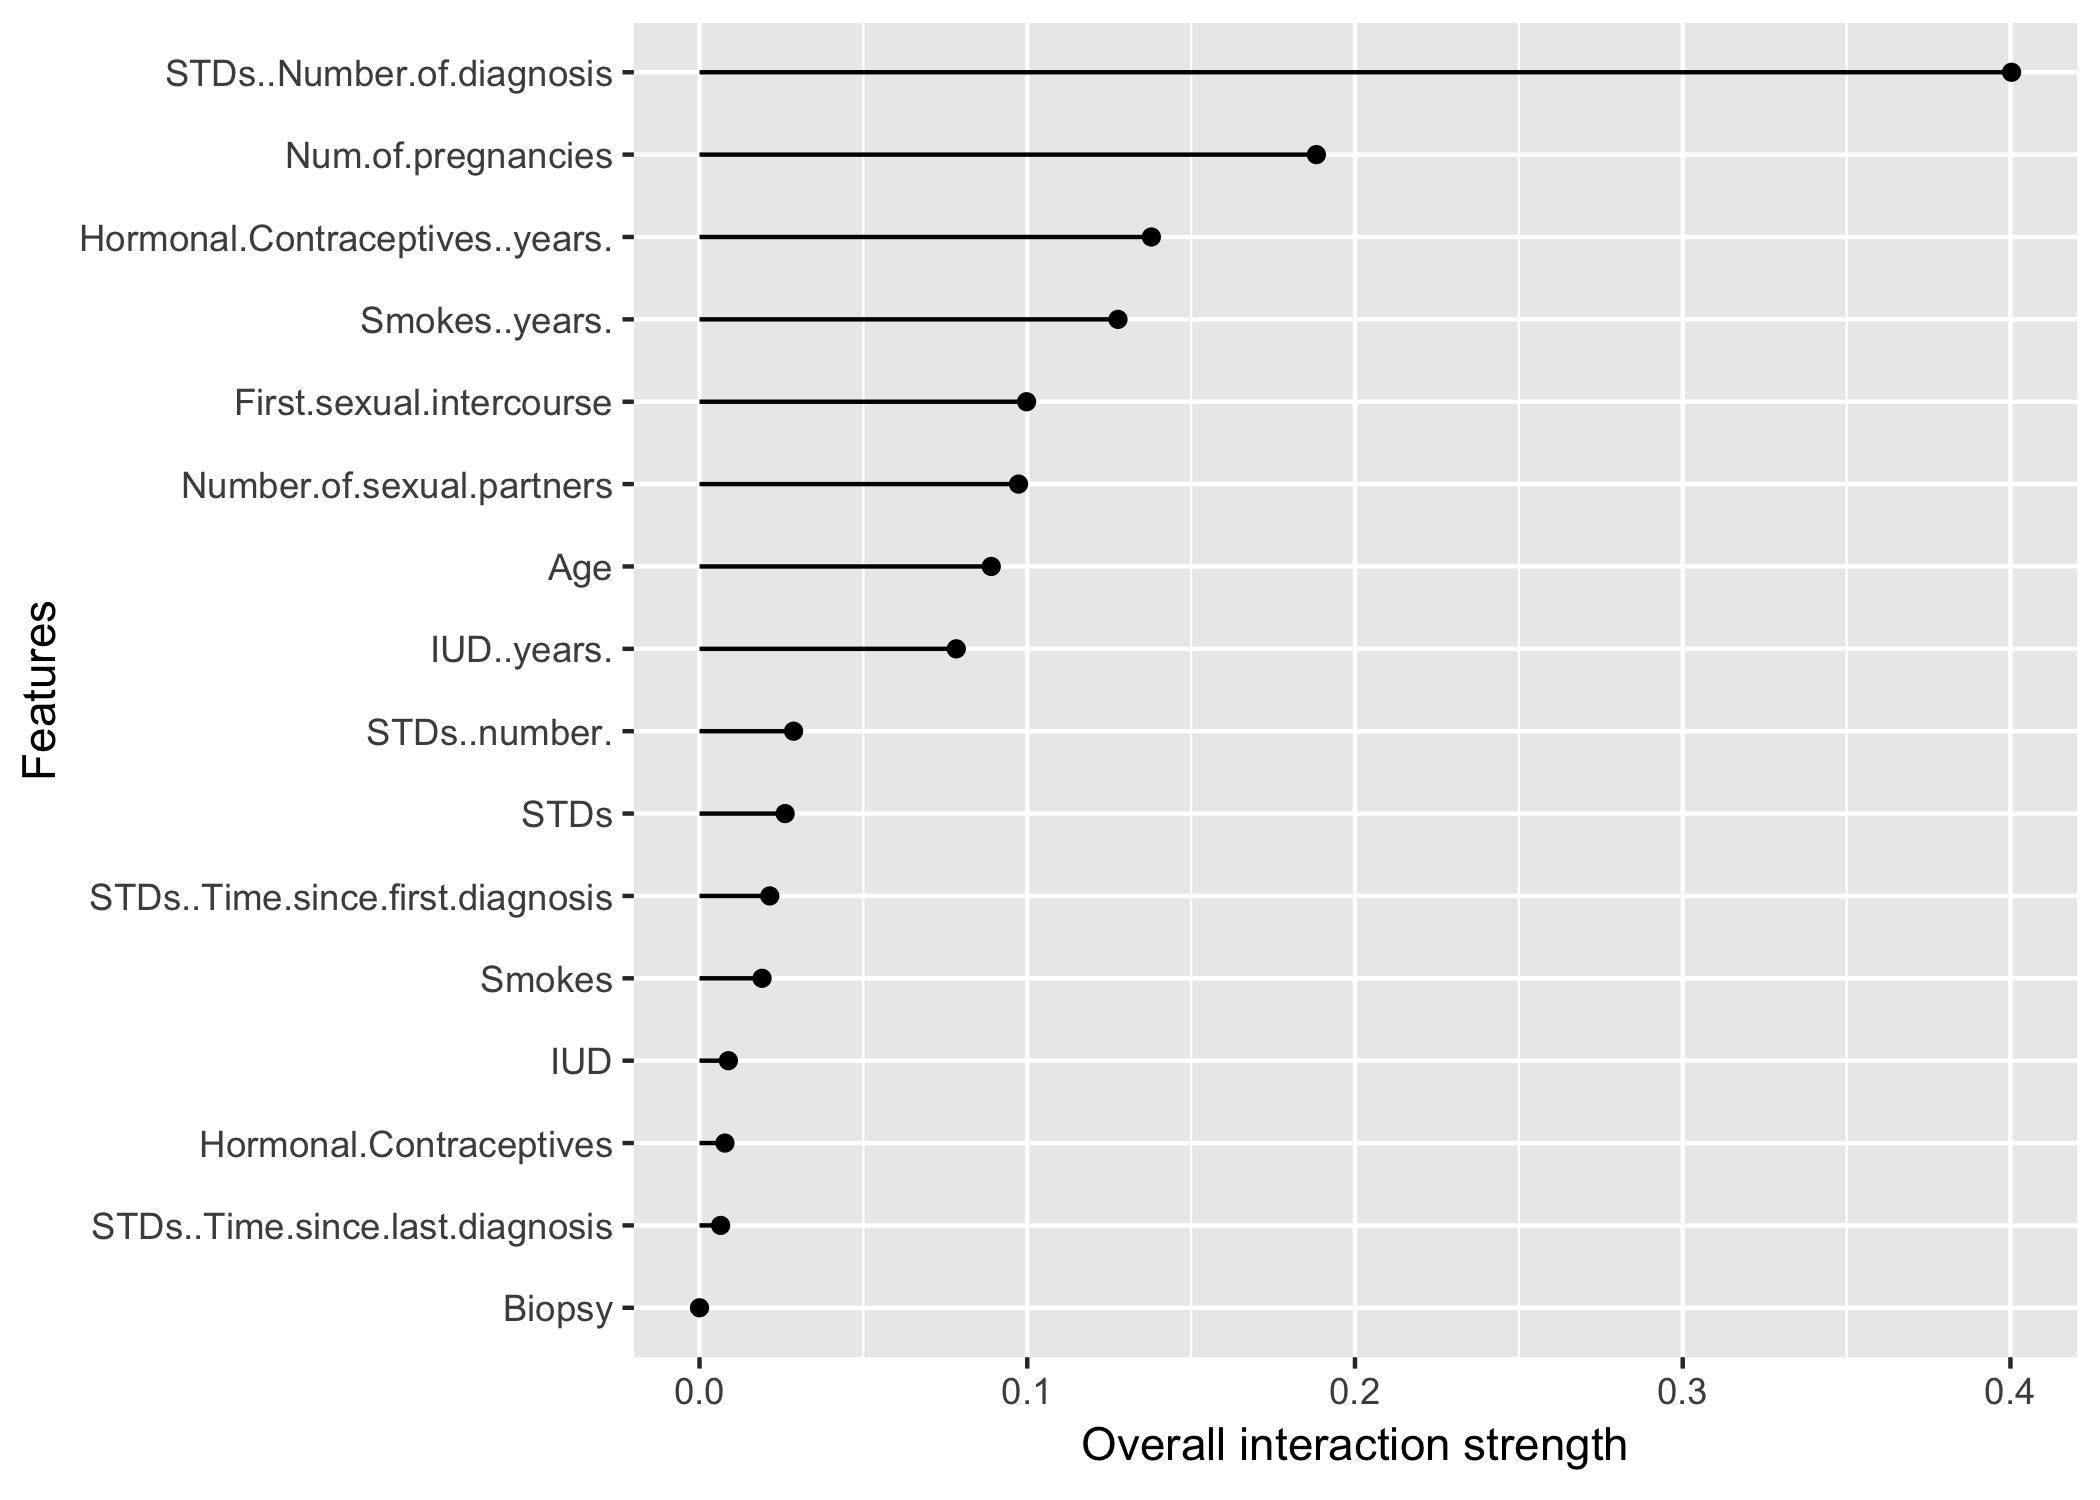 The interaction strength for each feature with all other features for a random forest predicting the probability of cervical cancer. The number of diagnosed sexually transmitted diseases has the highest interaction effect with all other features, followed by the number of pregnancies.